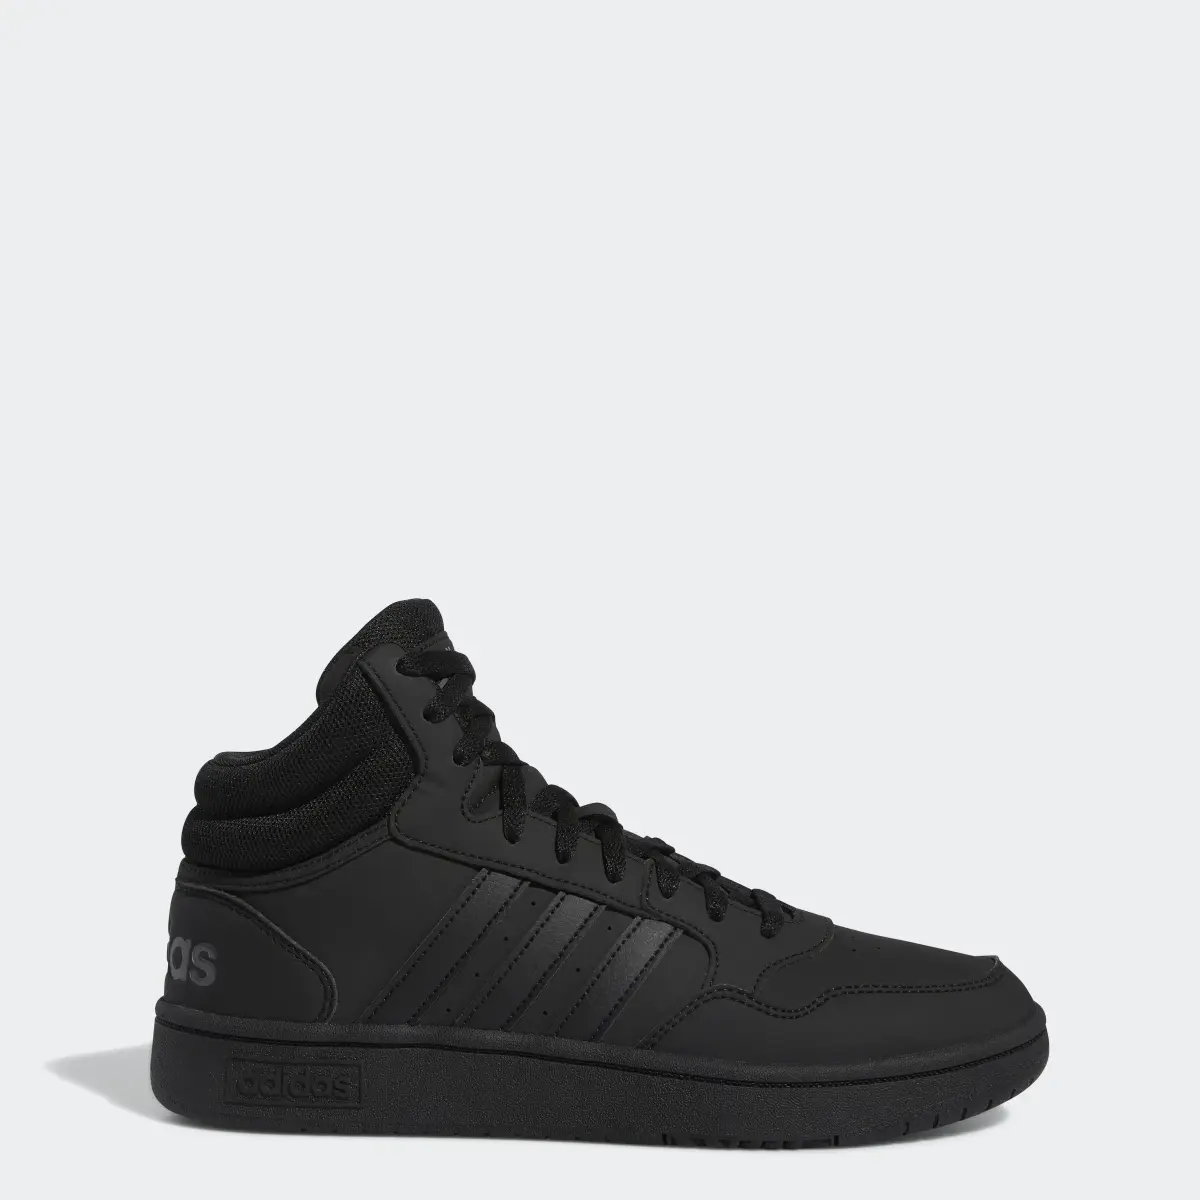 Adidas Hoops 3 Mid Lifestyle Basketball Mid Classic Schuh. 1